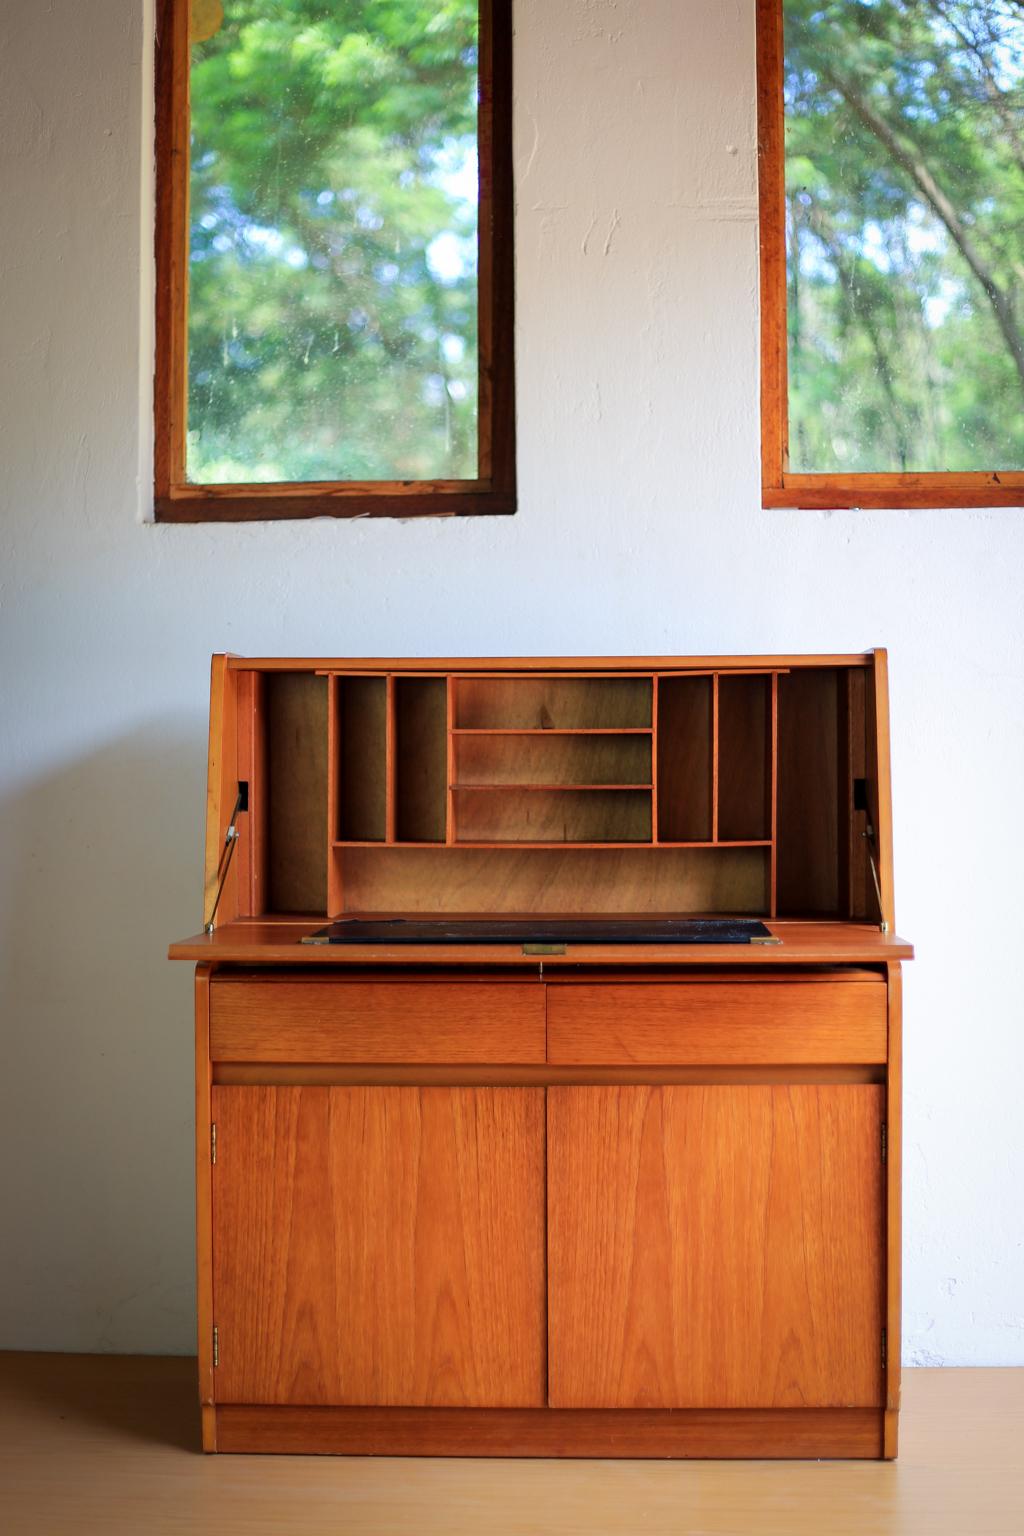 A midcentury teak escritoire or writing bureau by Remploy in the clever, space saving Scandinavian modern style. It has a drop front desk with pigeon hole unit, two drawers, and a two door cabinet below. 

It has the original key and the maker's